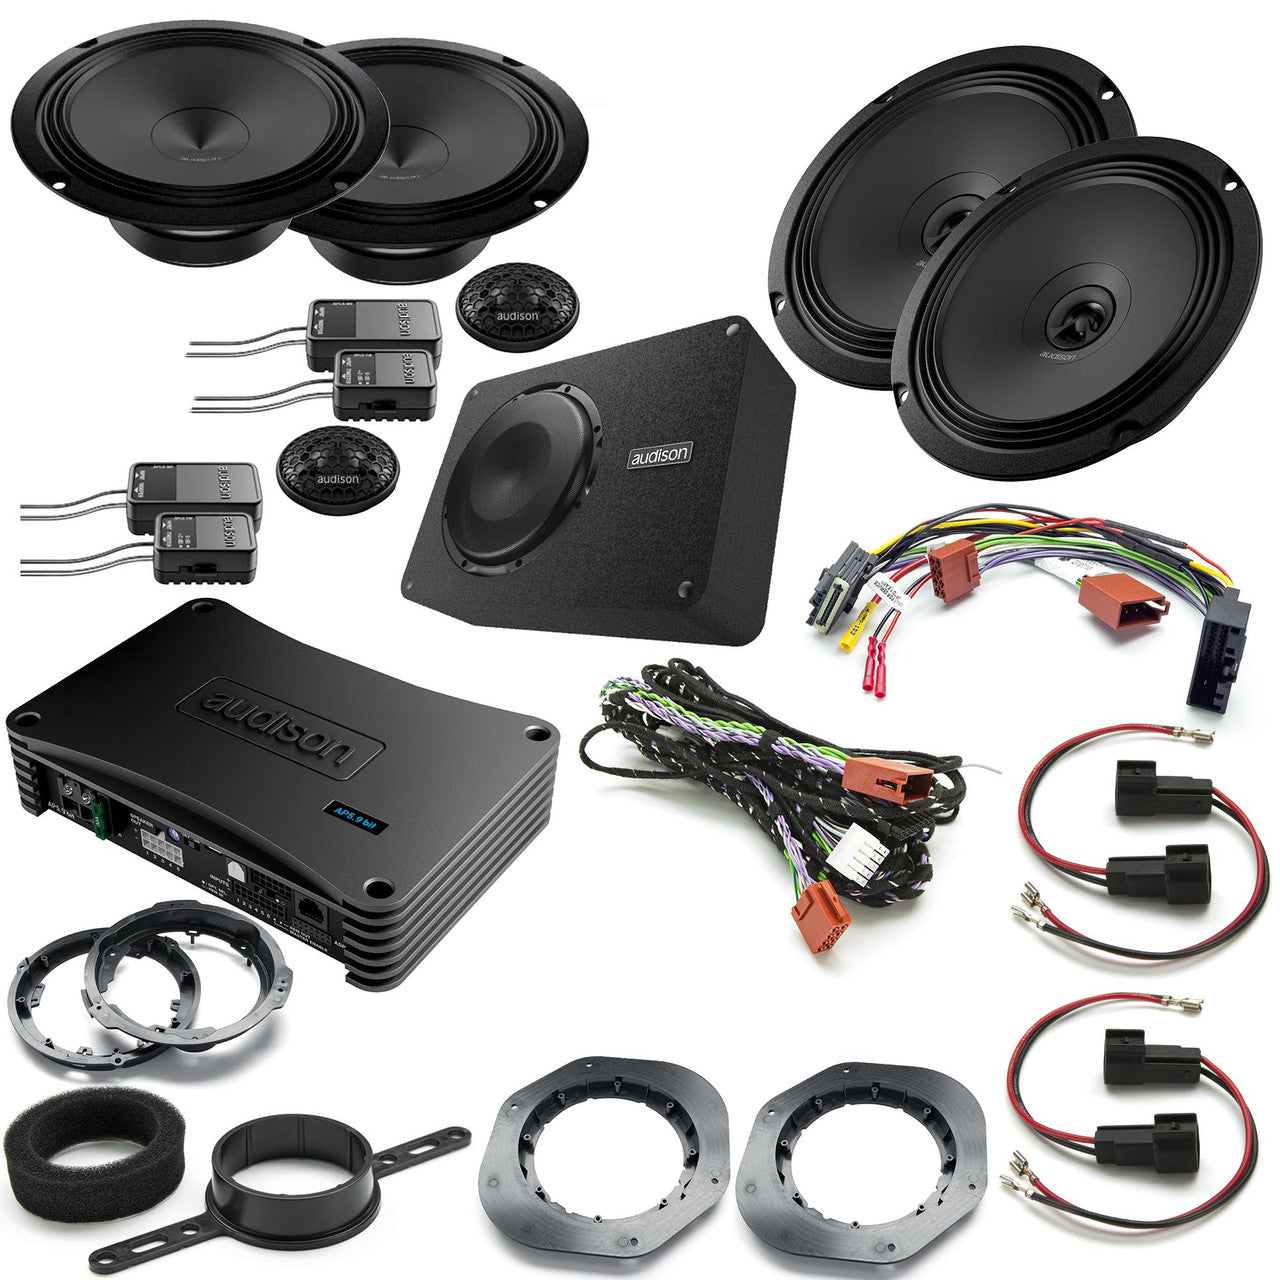 Audison F-150 15-17 5.9 Audison Front, Rear, Amp, and 8" Sub Bundle Compatible with 15-17 Ford F-150 Non Sony Sound Systems